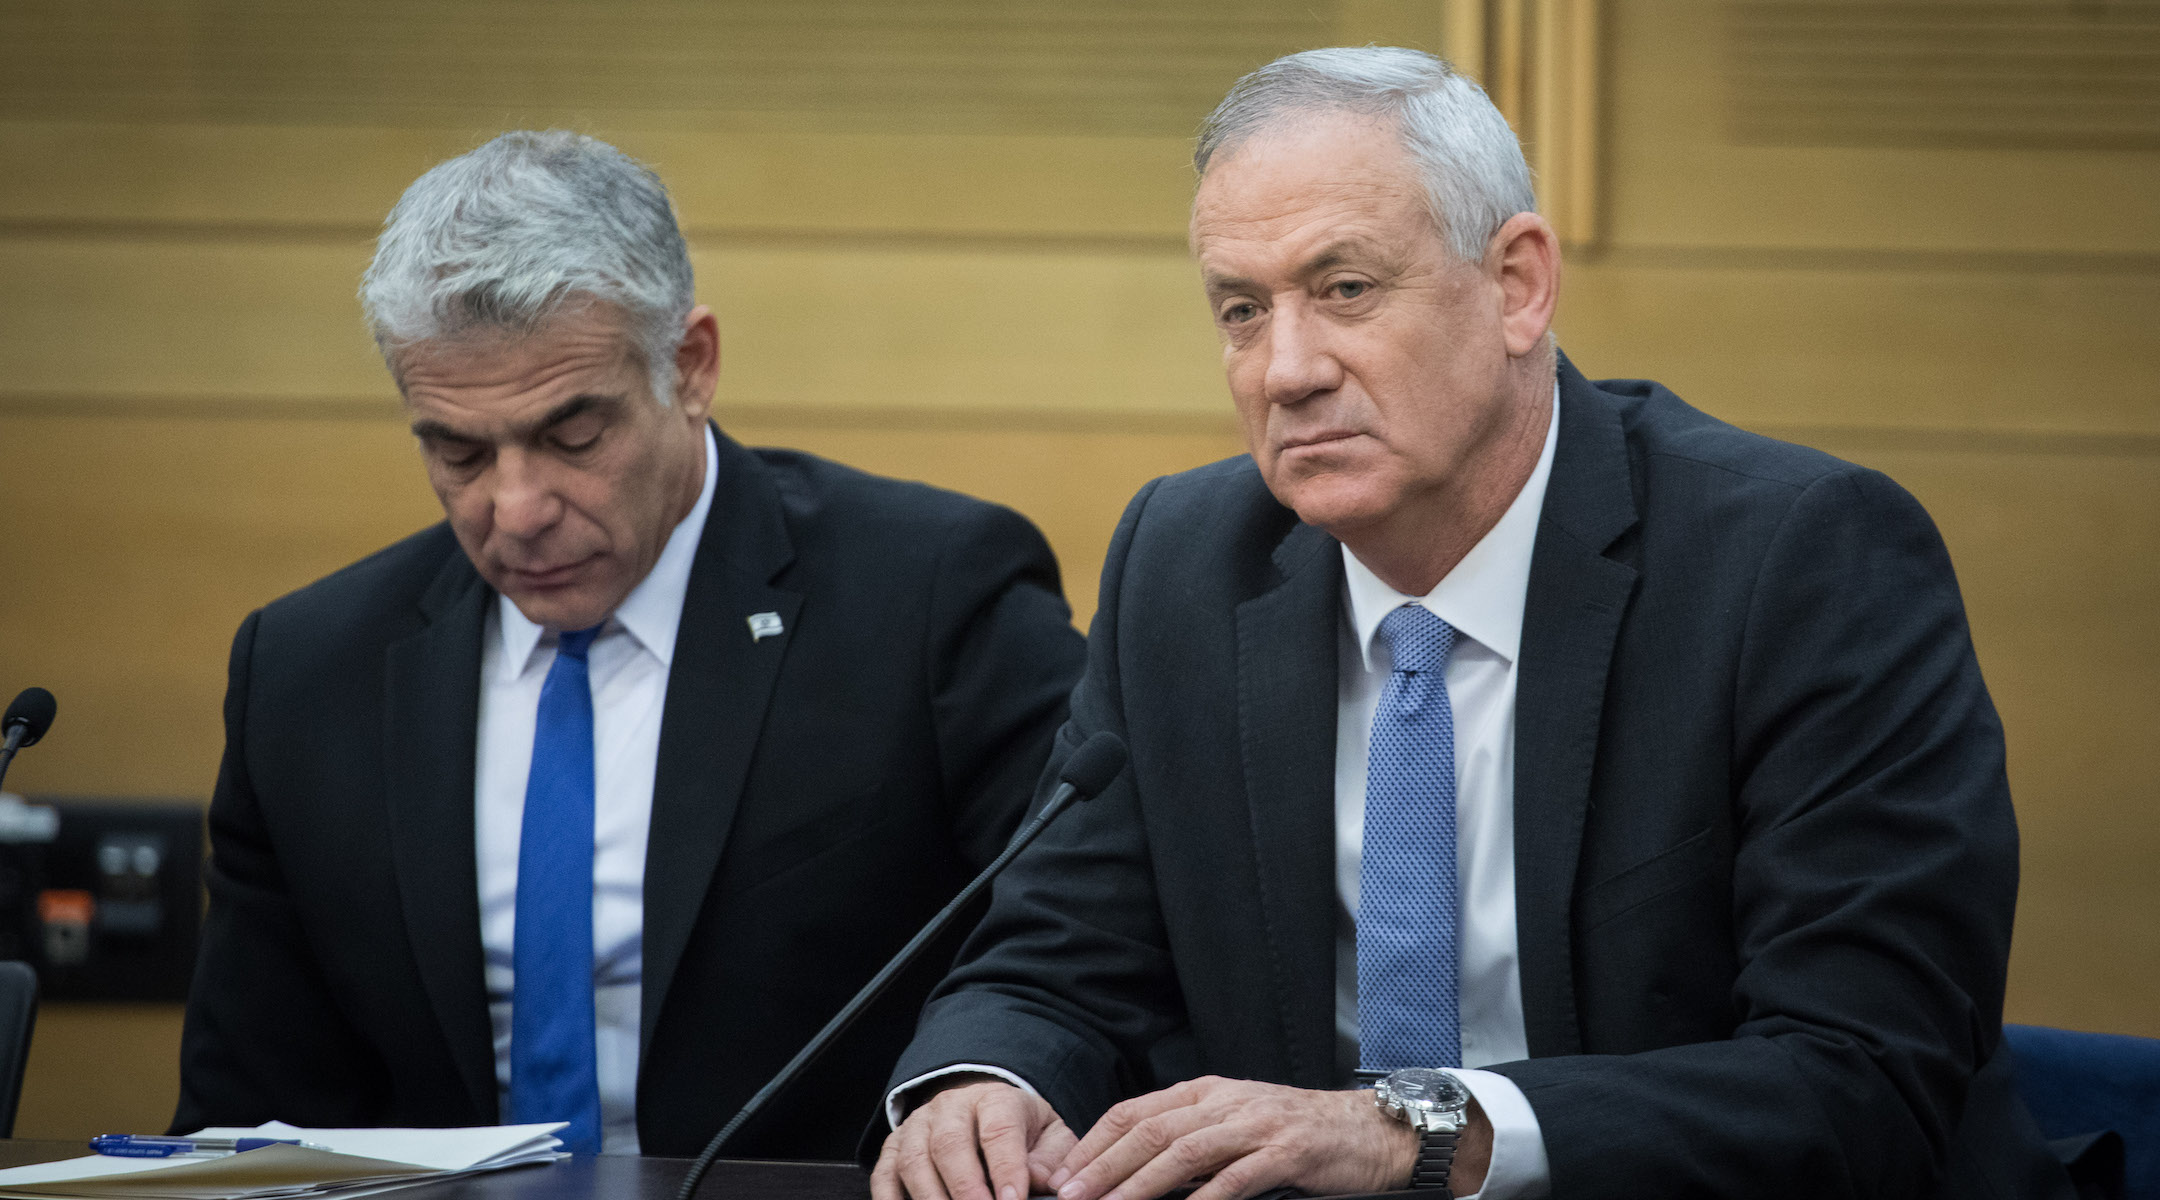 Blue and White party chairmen Benny Gantz and Yair Lapid during a faction meeting at the Knesset, the Israeli parliament in Jerusalem, Nov. 18, 2019. (Hadas Parush/Flash90)